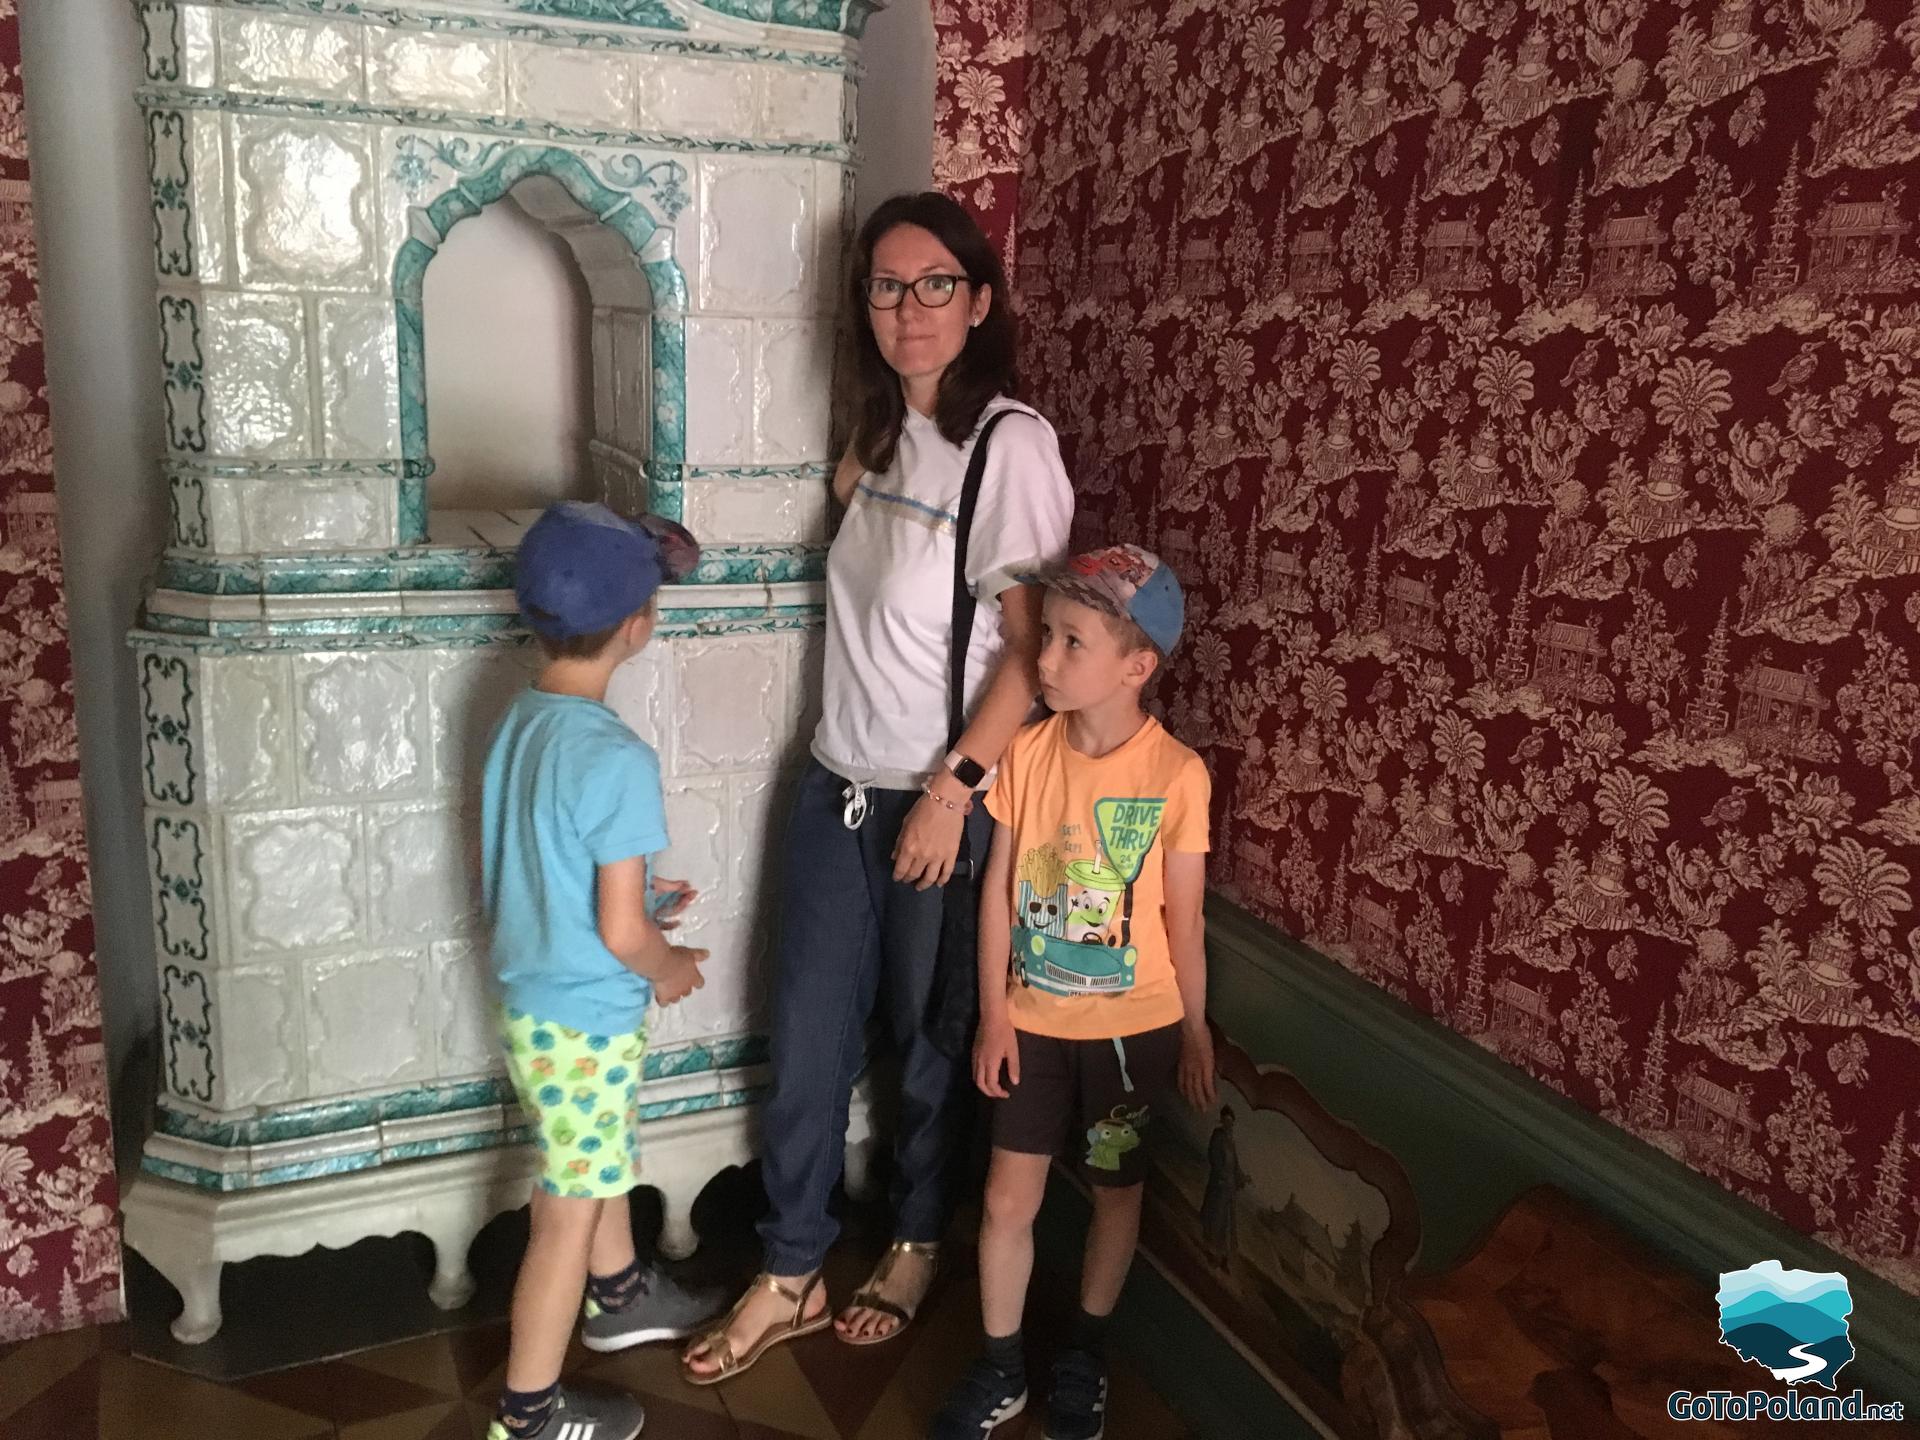 a woman and two boys standing near tiled stove, on the wall there is a patterned red wallpaper 